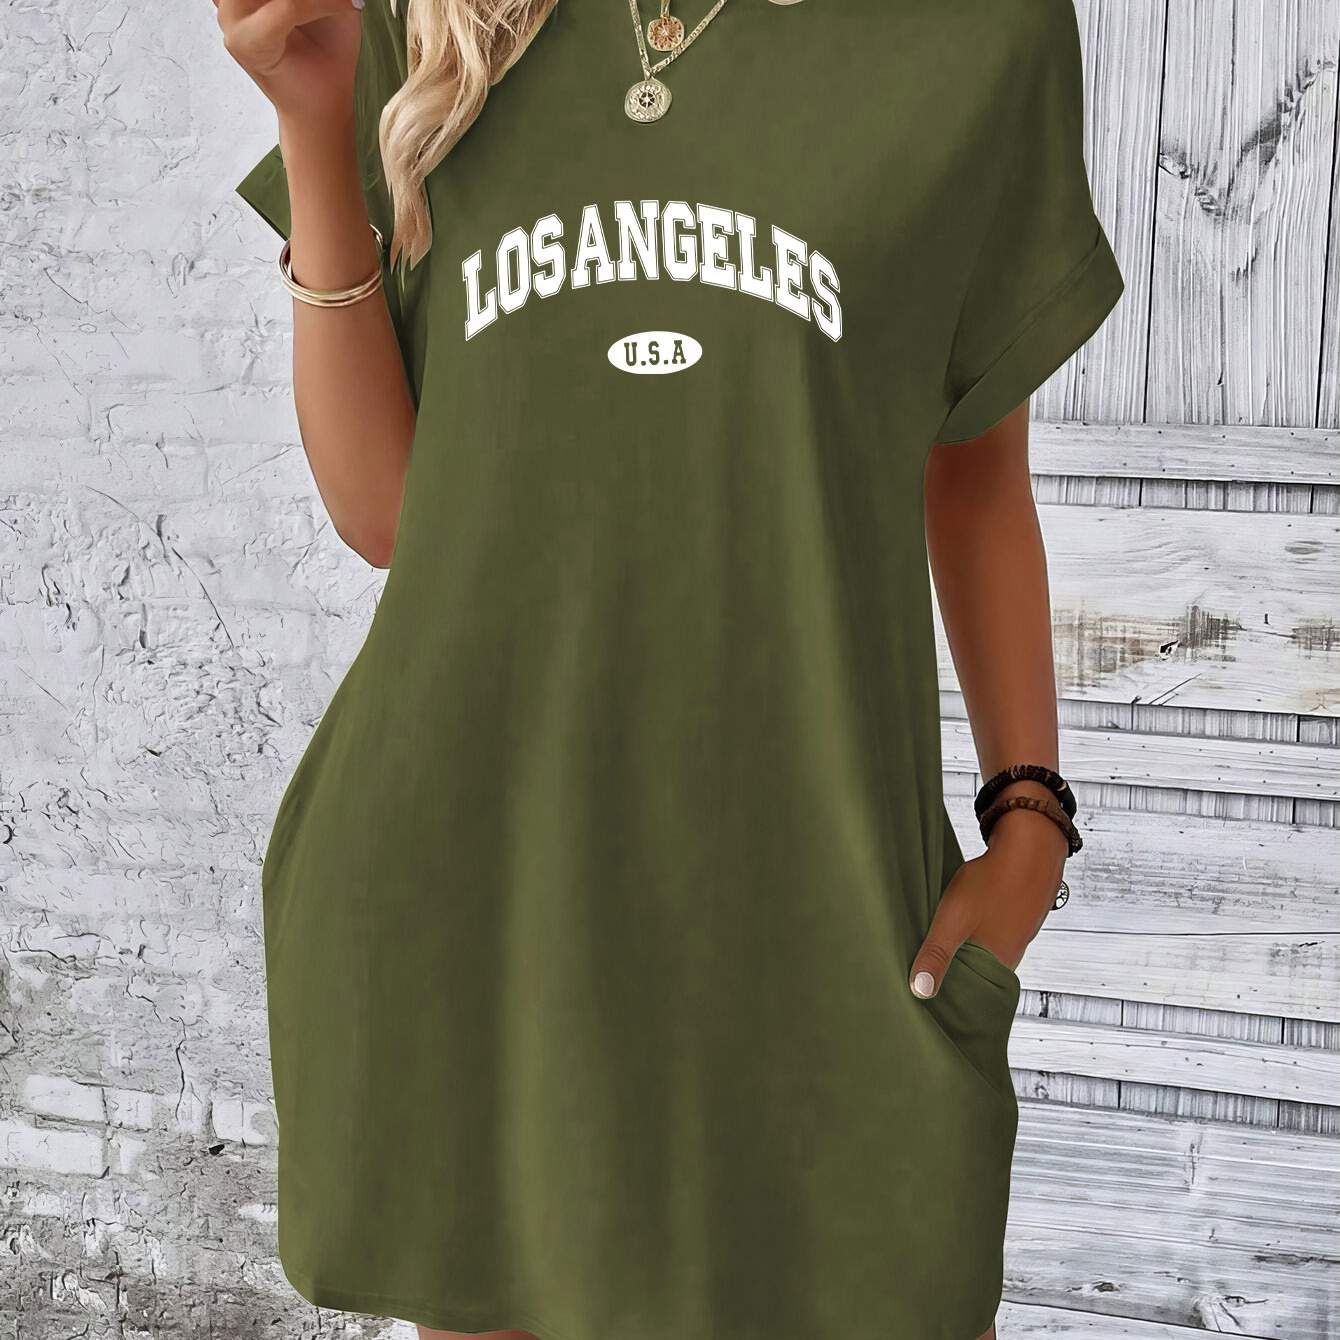 

Los Angeles Print Dress With Pockets, Short Sleeve Crew Neck Casual Dress For Summer & Spring, Women's Clothing